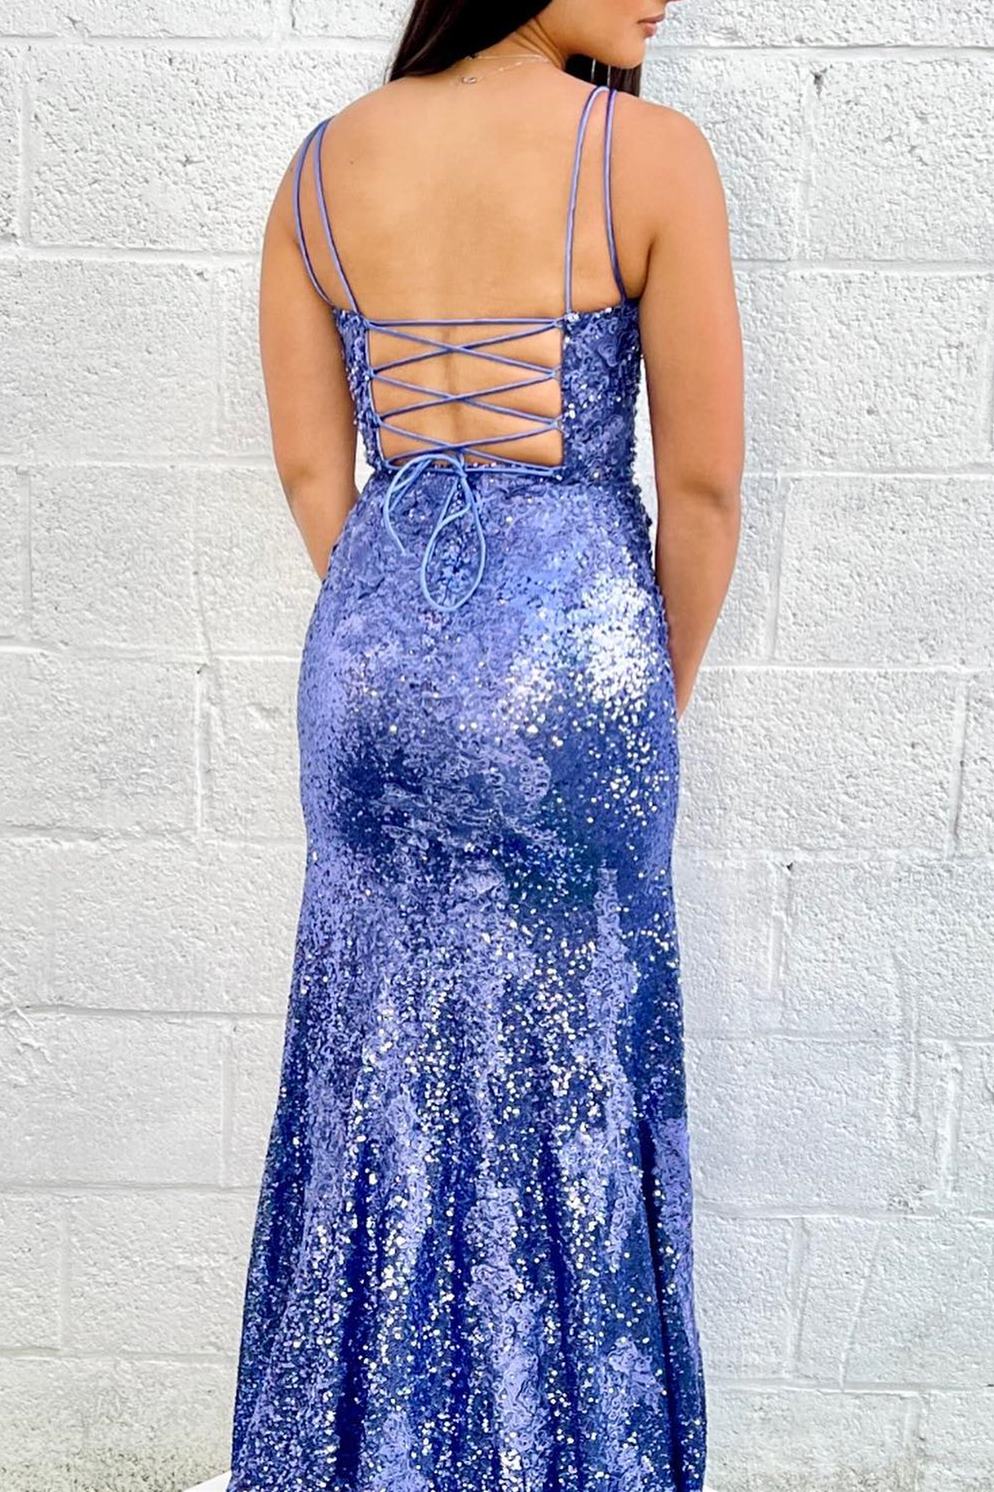 Mermaid Purples Sequins Long Prom Dress with Slit